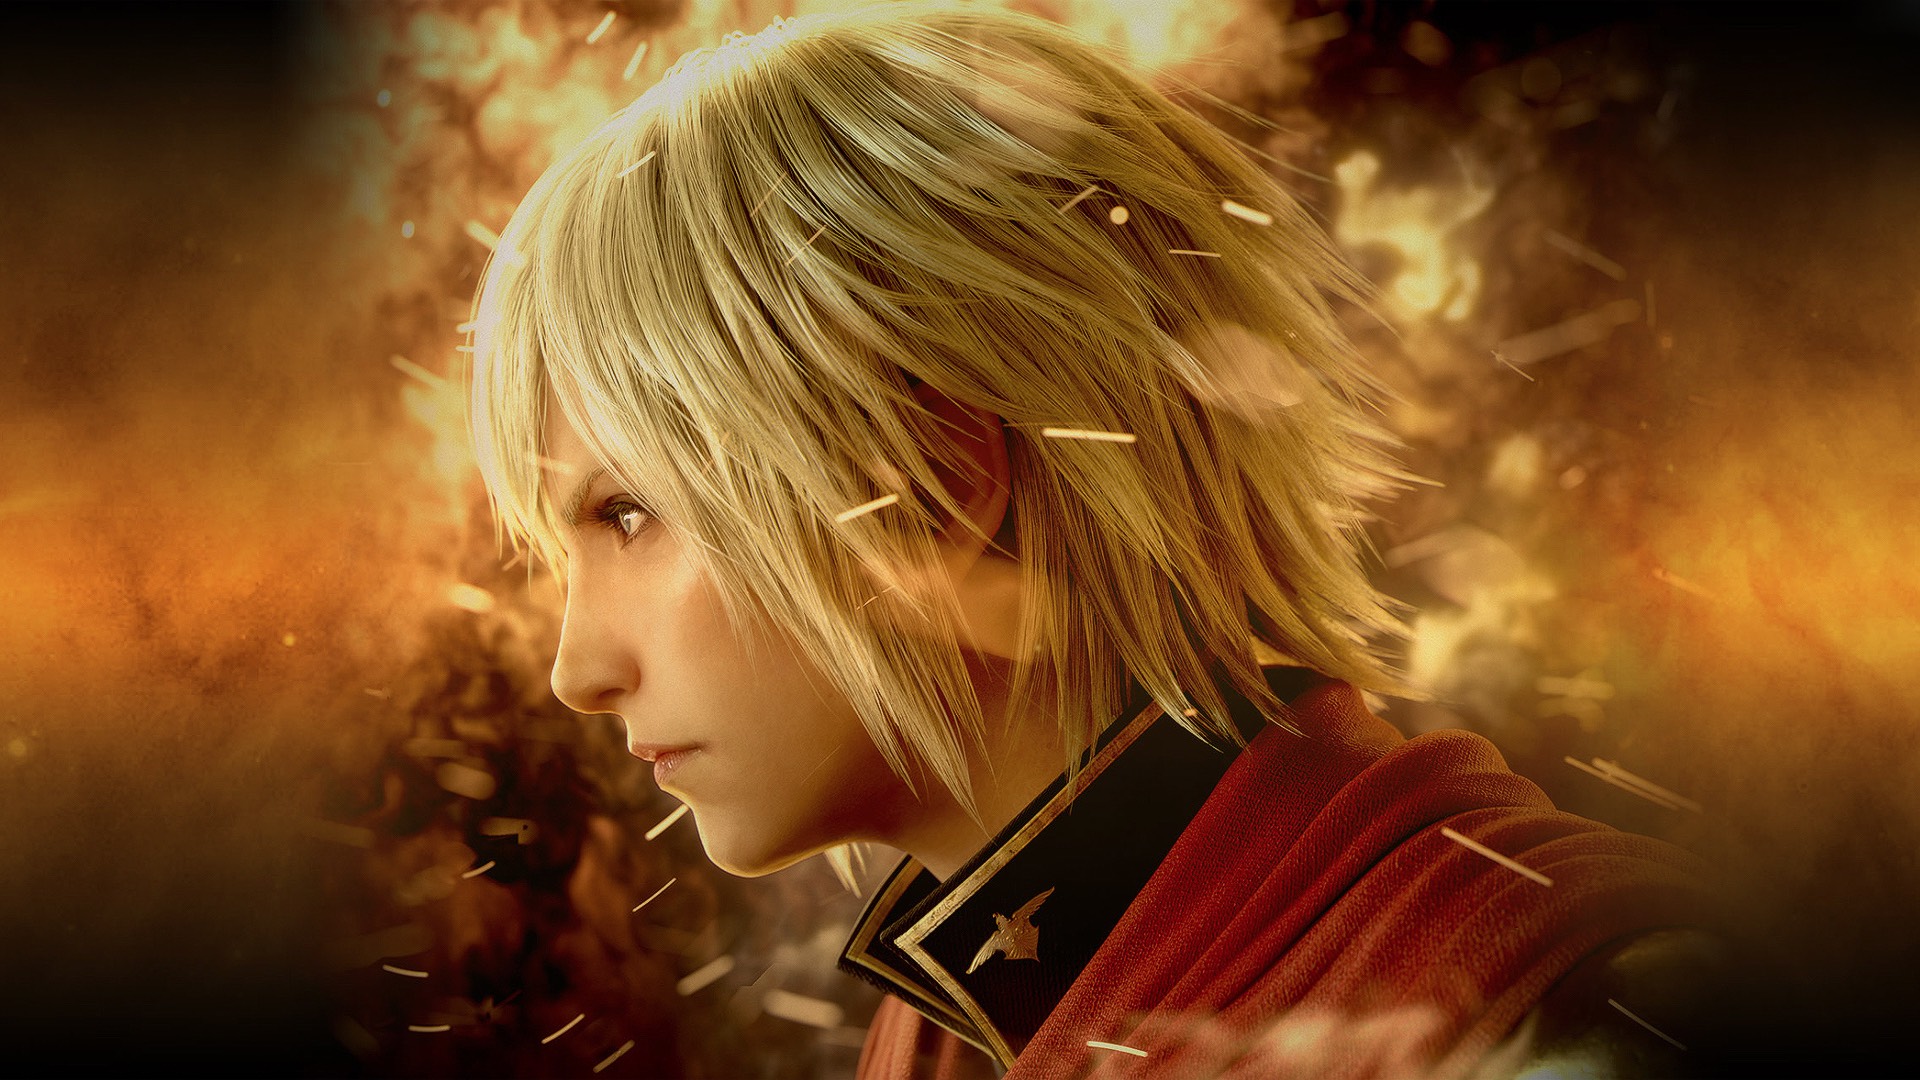 Final Fantasy Type 0 Wallpapers